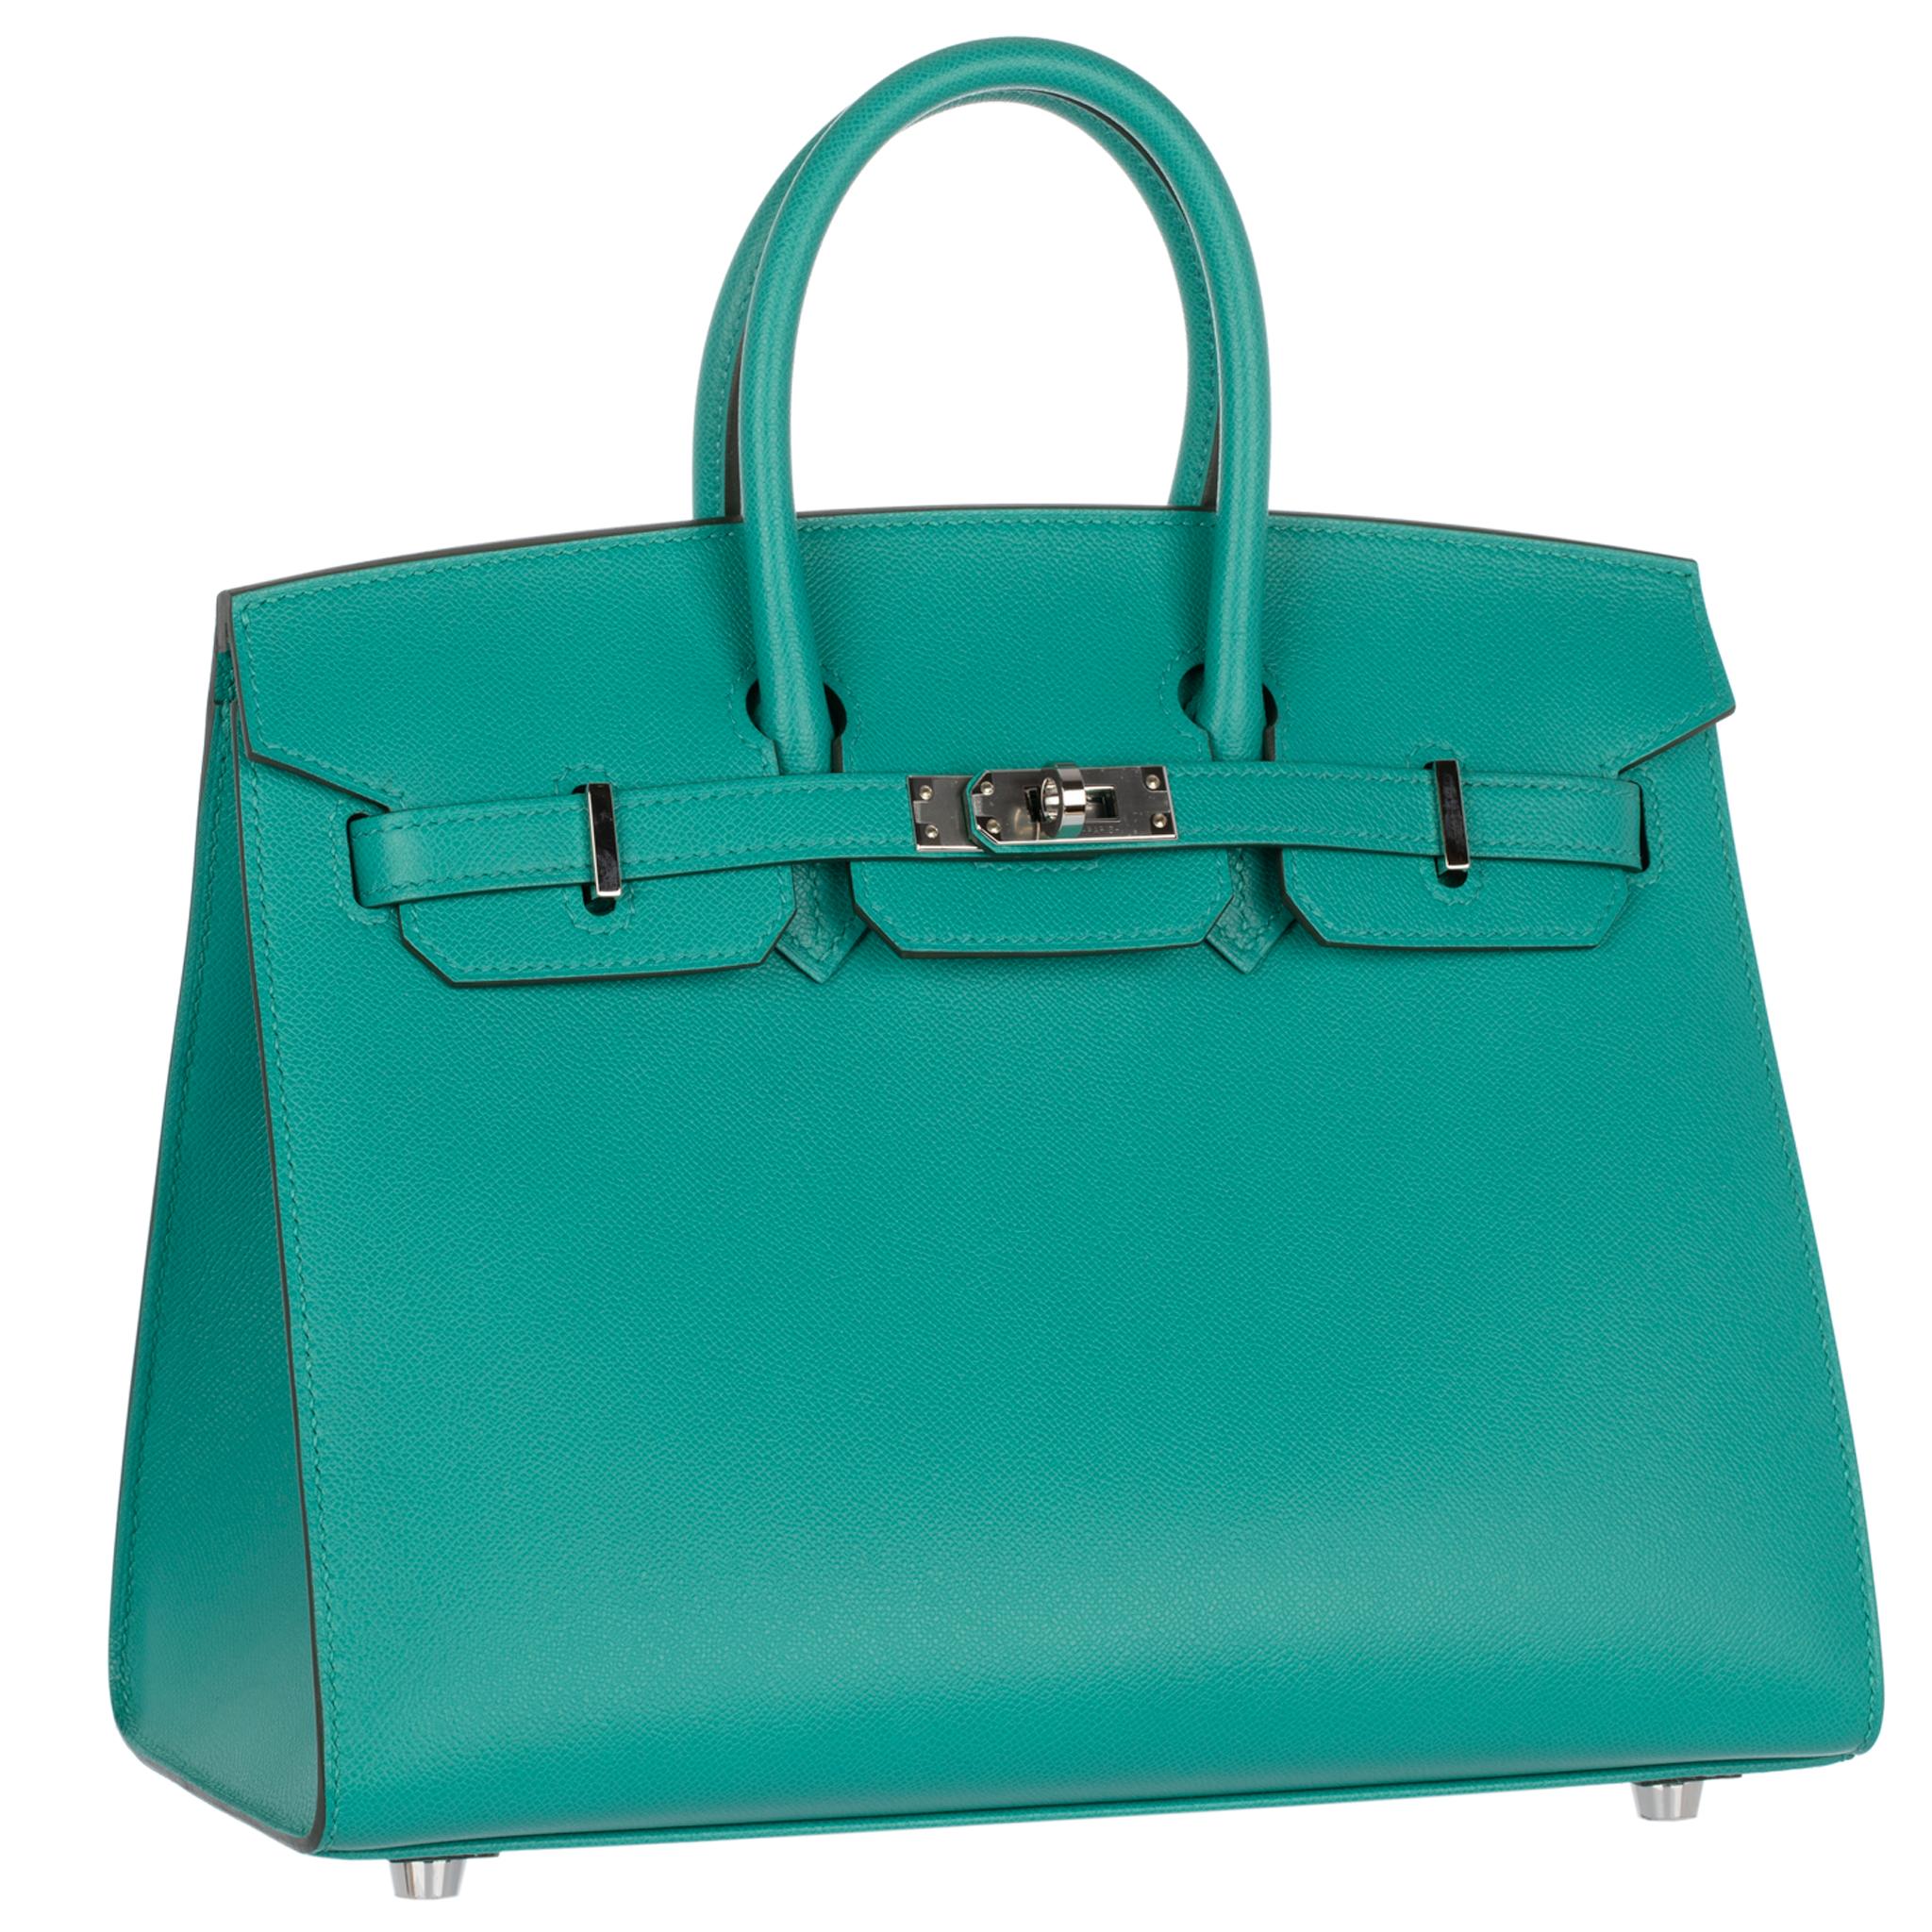 
Brand: Hermes

Product: Birkin Sellier

Size: 25 Cm

Colour:

Vert Verone

Material: Veau Madame Leather

Hardware: Palladium

Year: Z 2021

Condition:

Pristine:

The product is in pristine condition, without any signs of wear or damage. It